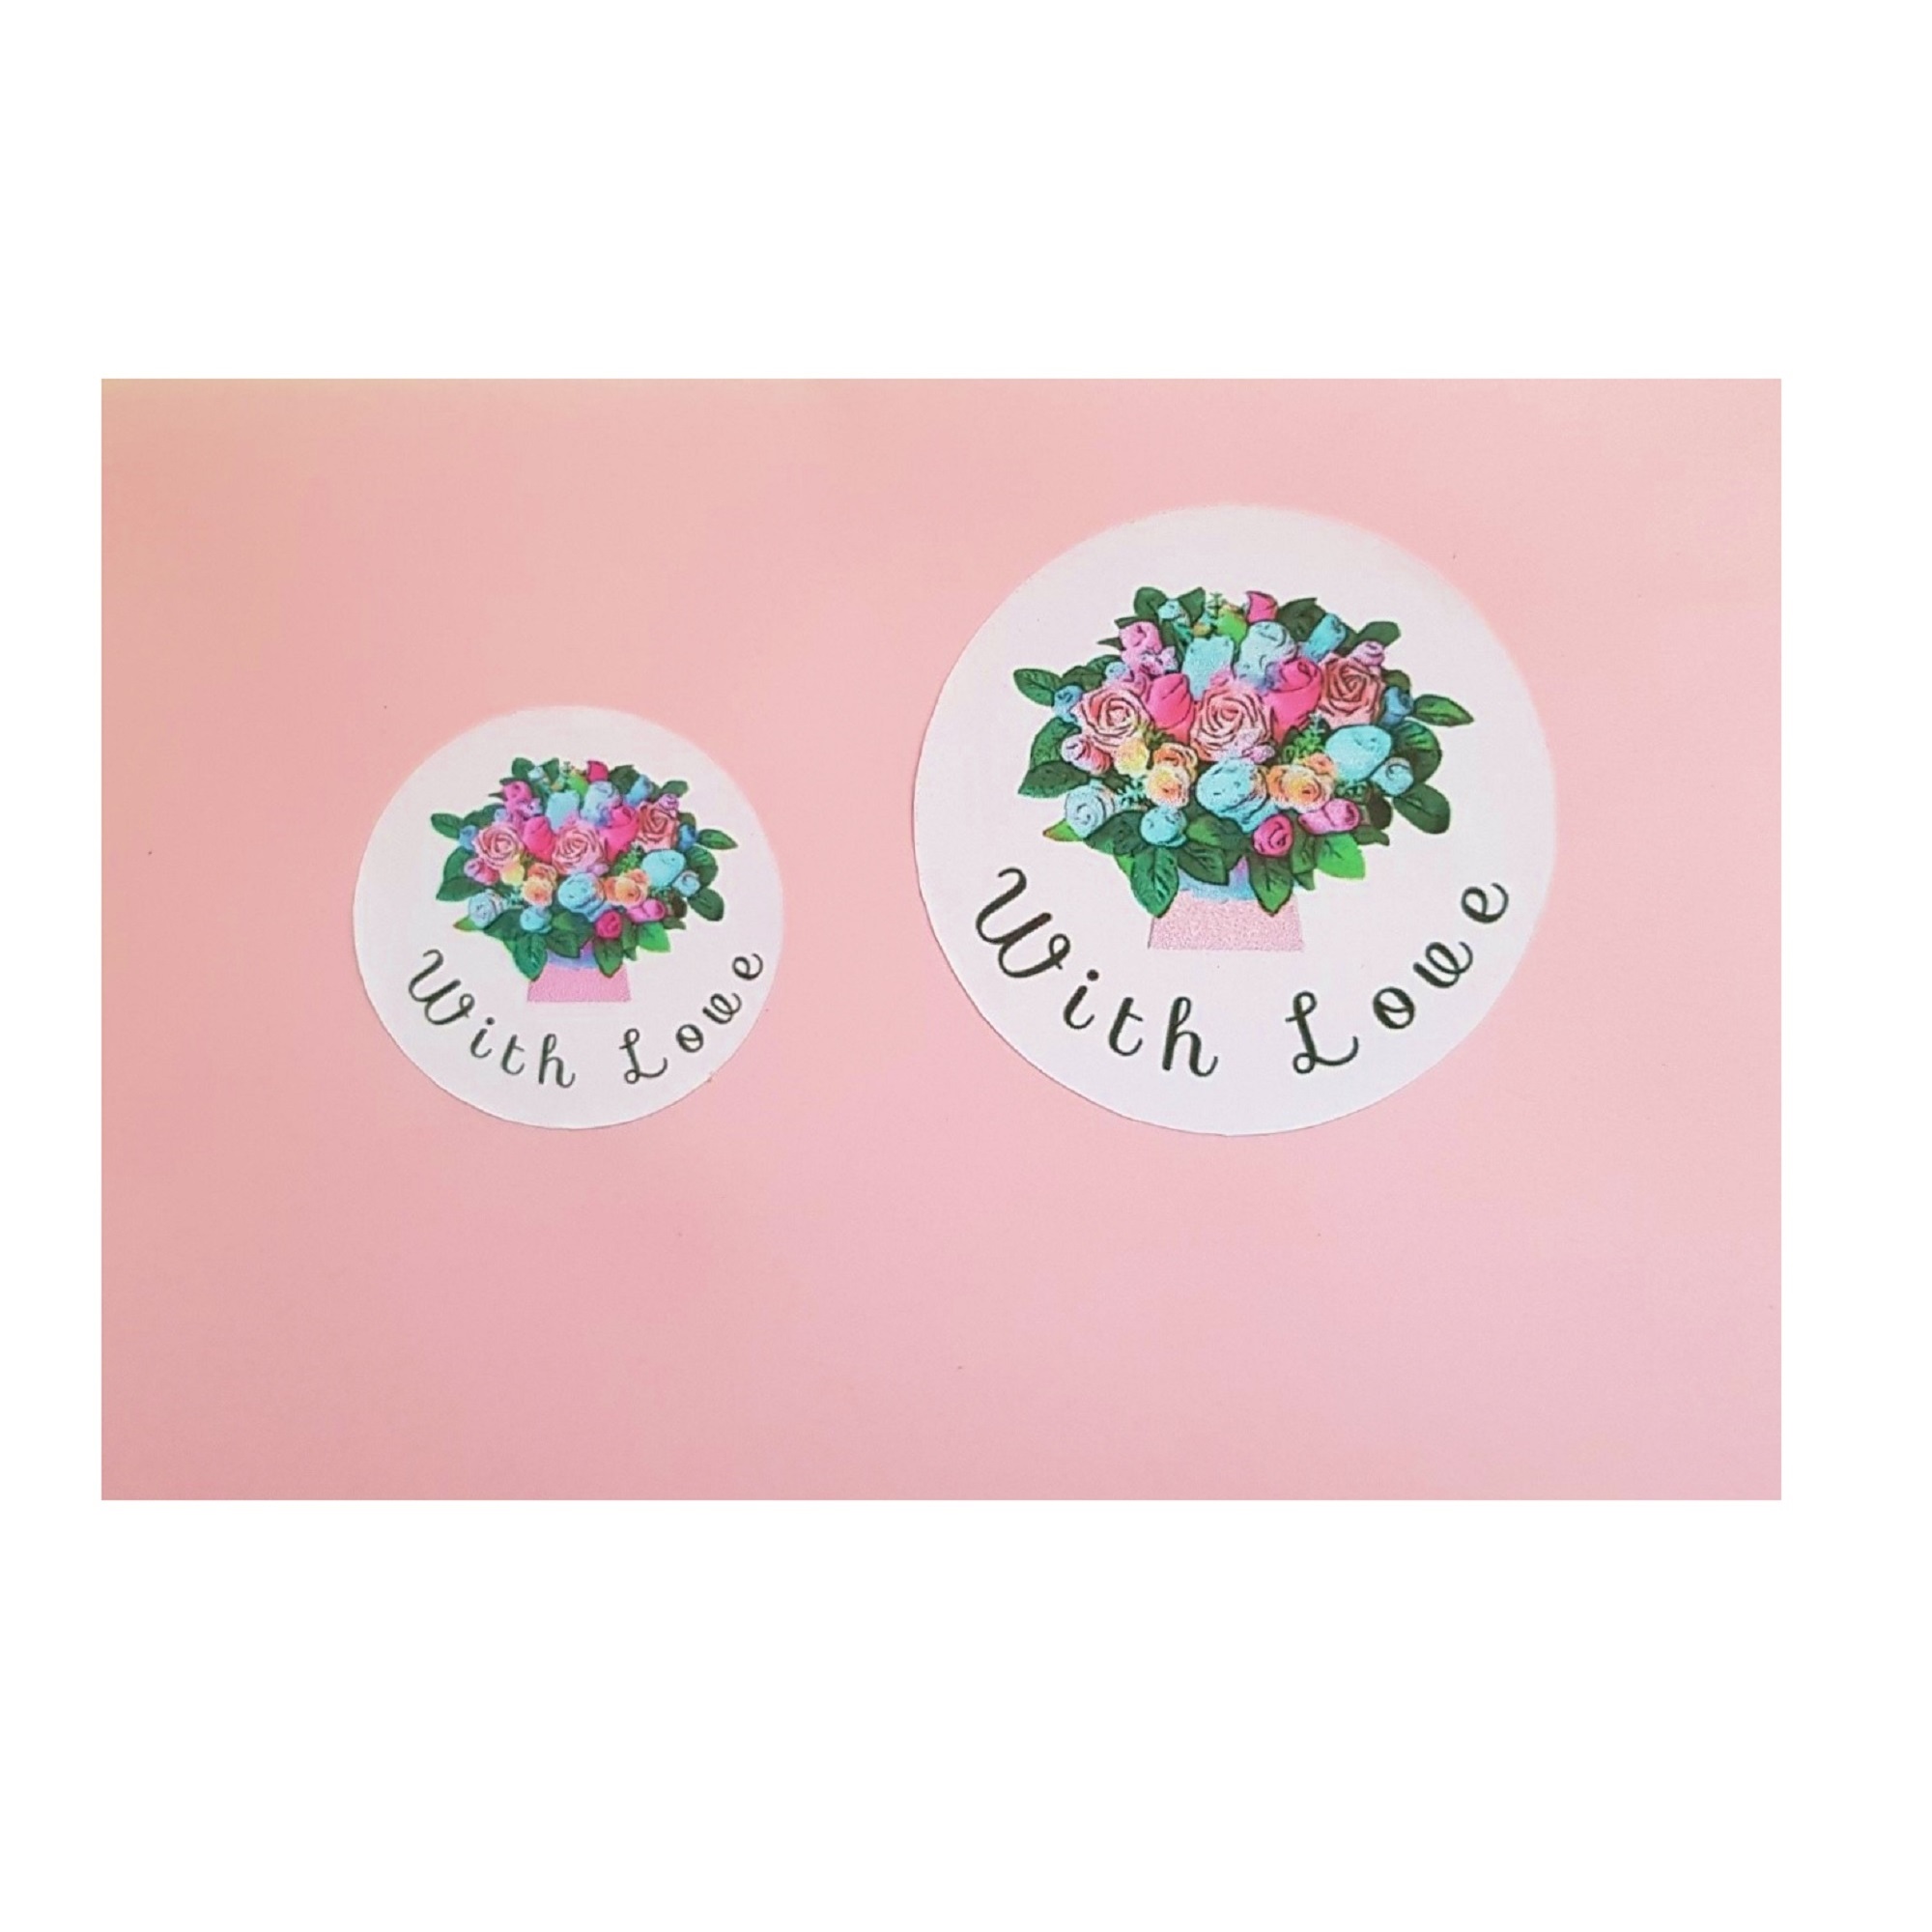 "With Love" Stickers - Pink Floral Bouquet